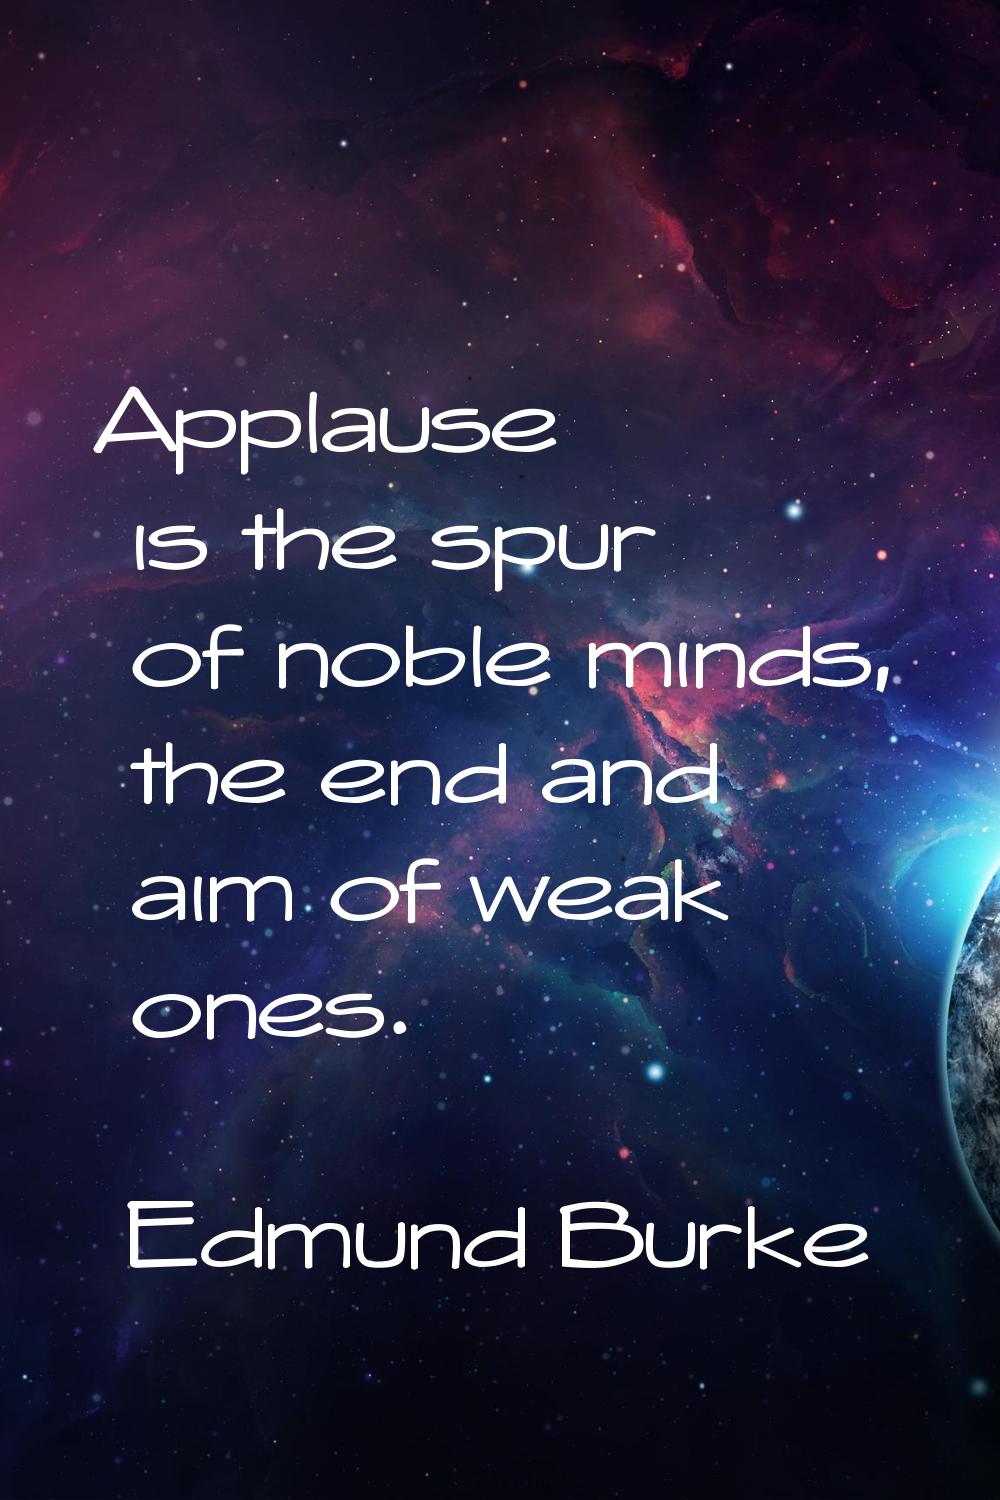 Applause is the spur of noble minds, the end and aim of weak ones.